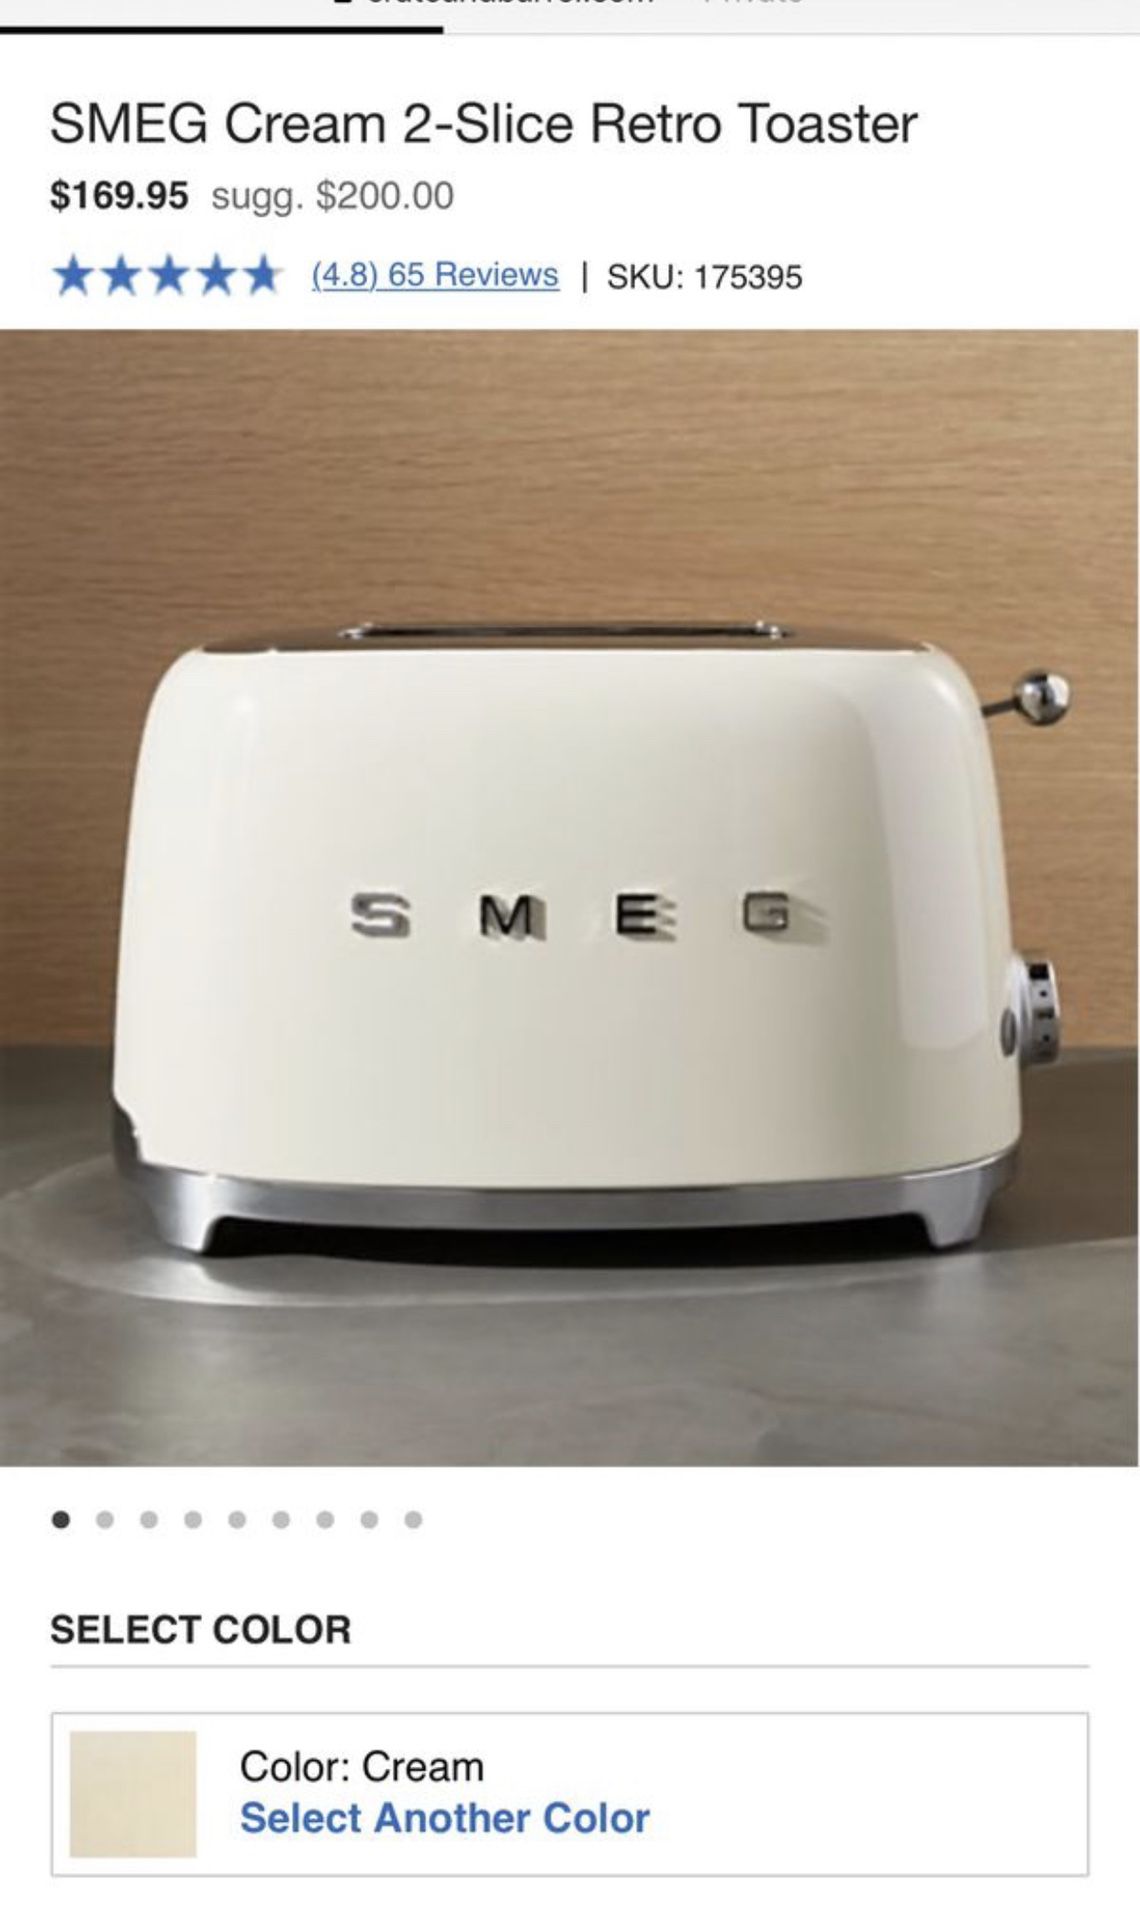 NEW, NEVER USED, SMEG CREAM TOASTER, IN BOX!